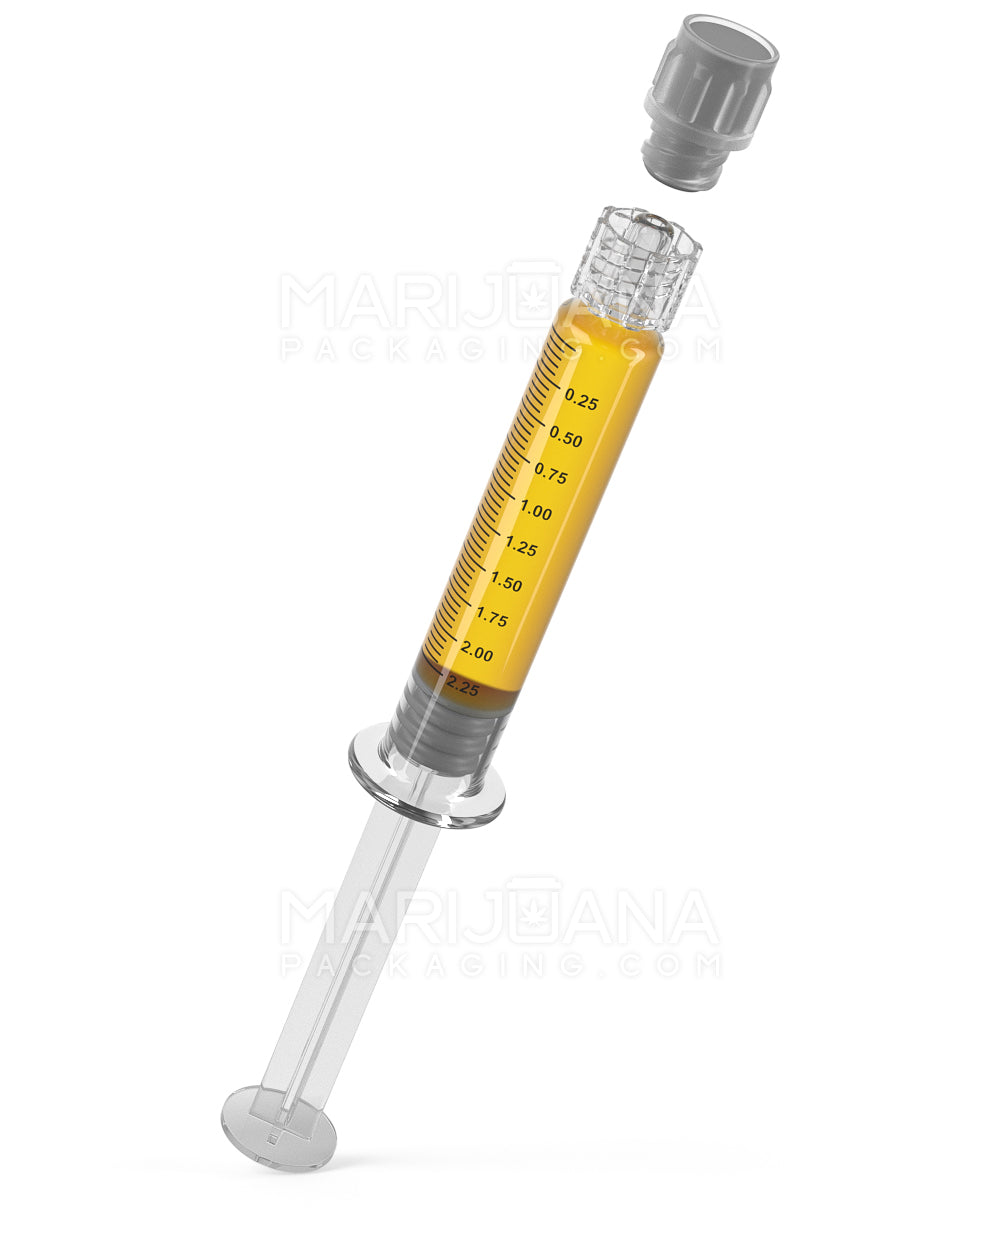 Luer Lock | Glass Dab Applicator Syringes | 2.25mL - 0.25mL Increments - 100 Count - 6